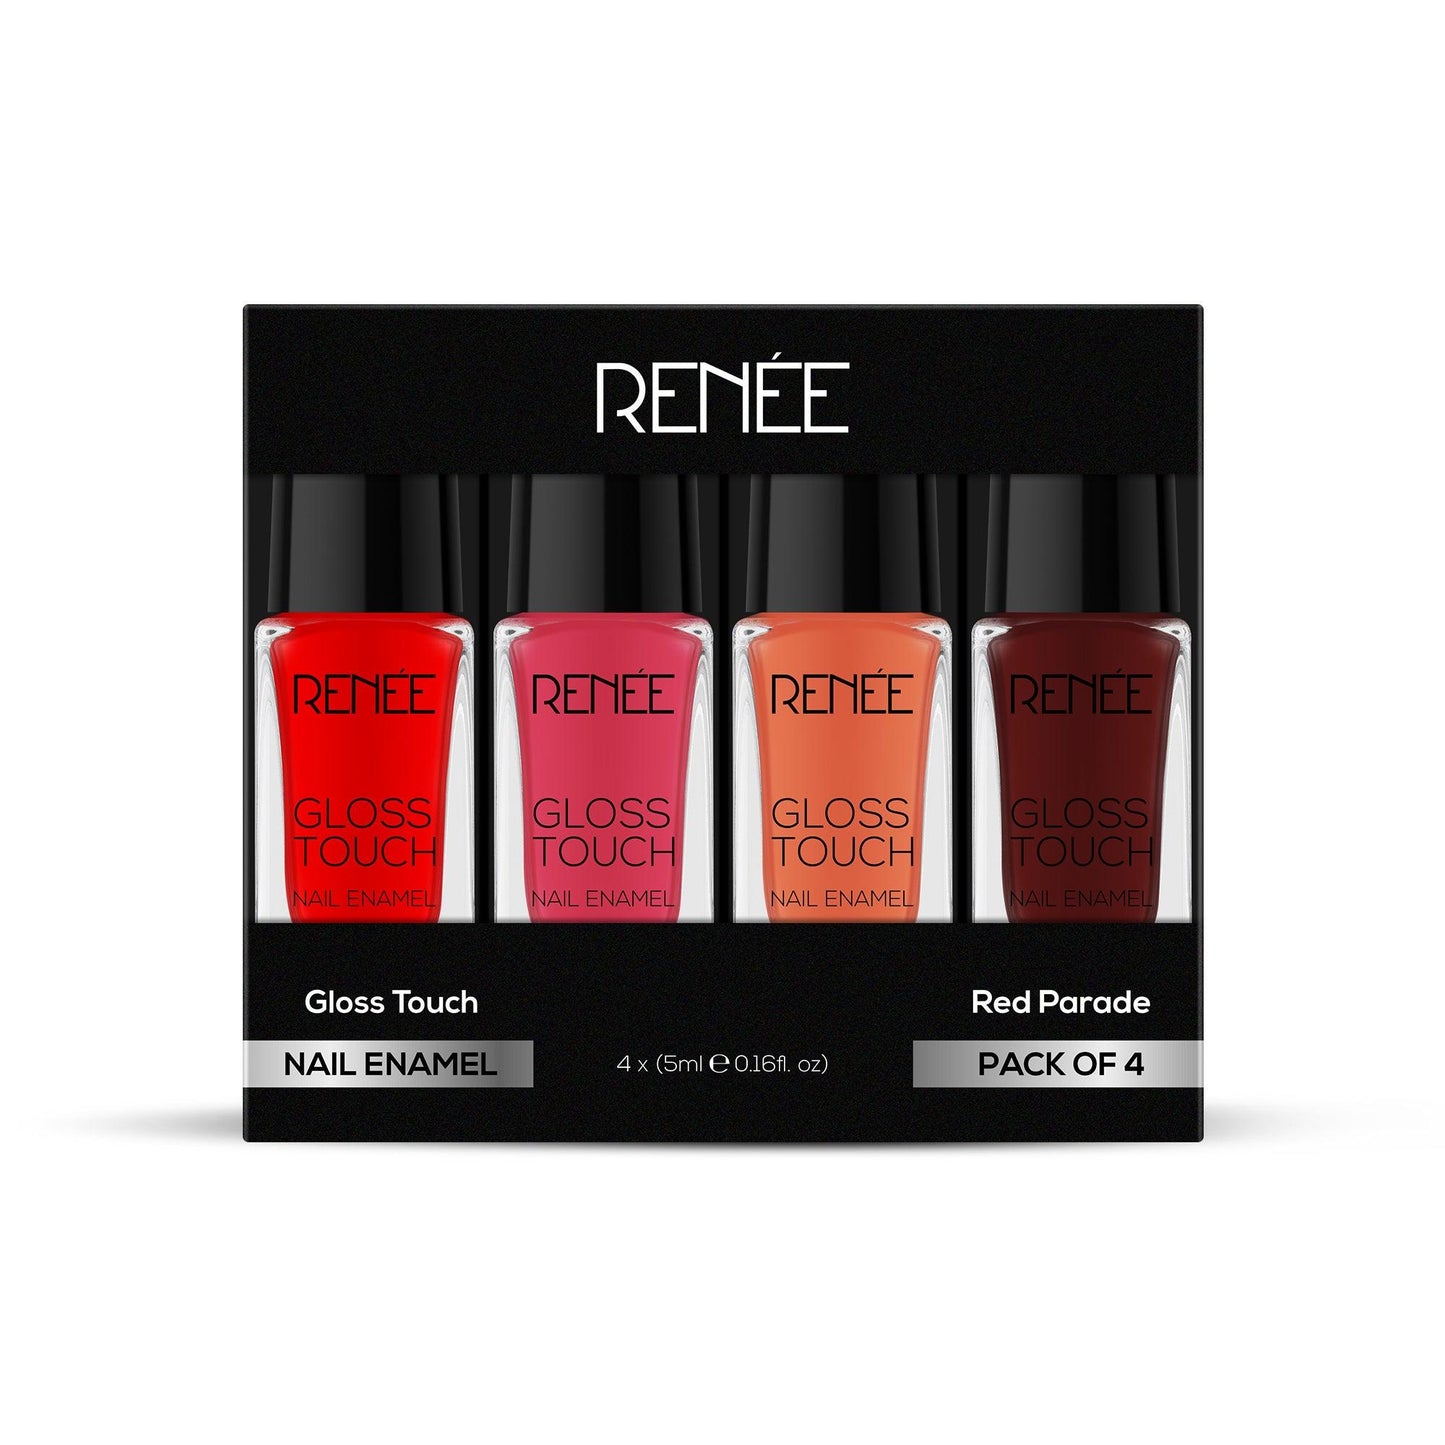 Renee Gloss Touch Set Of 4 Nail Enamels, 5ml Each - N03 Red Parade